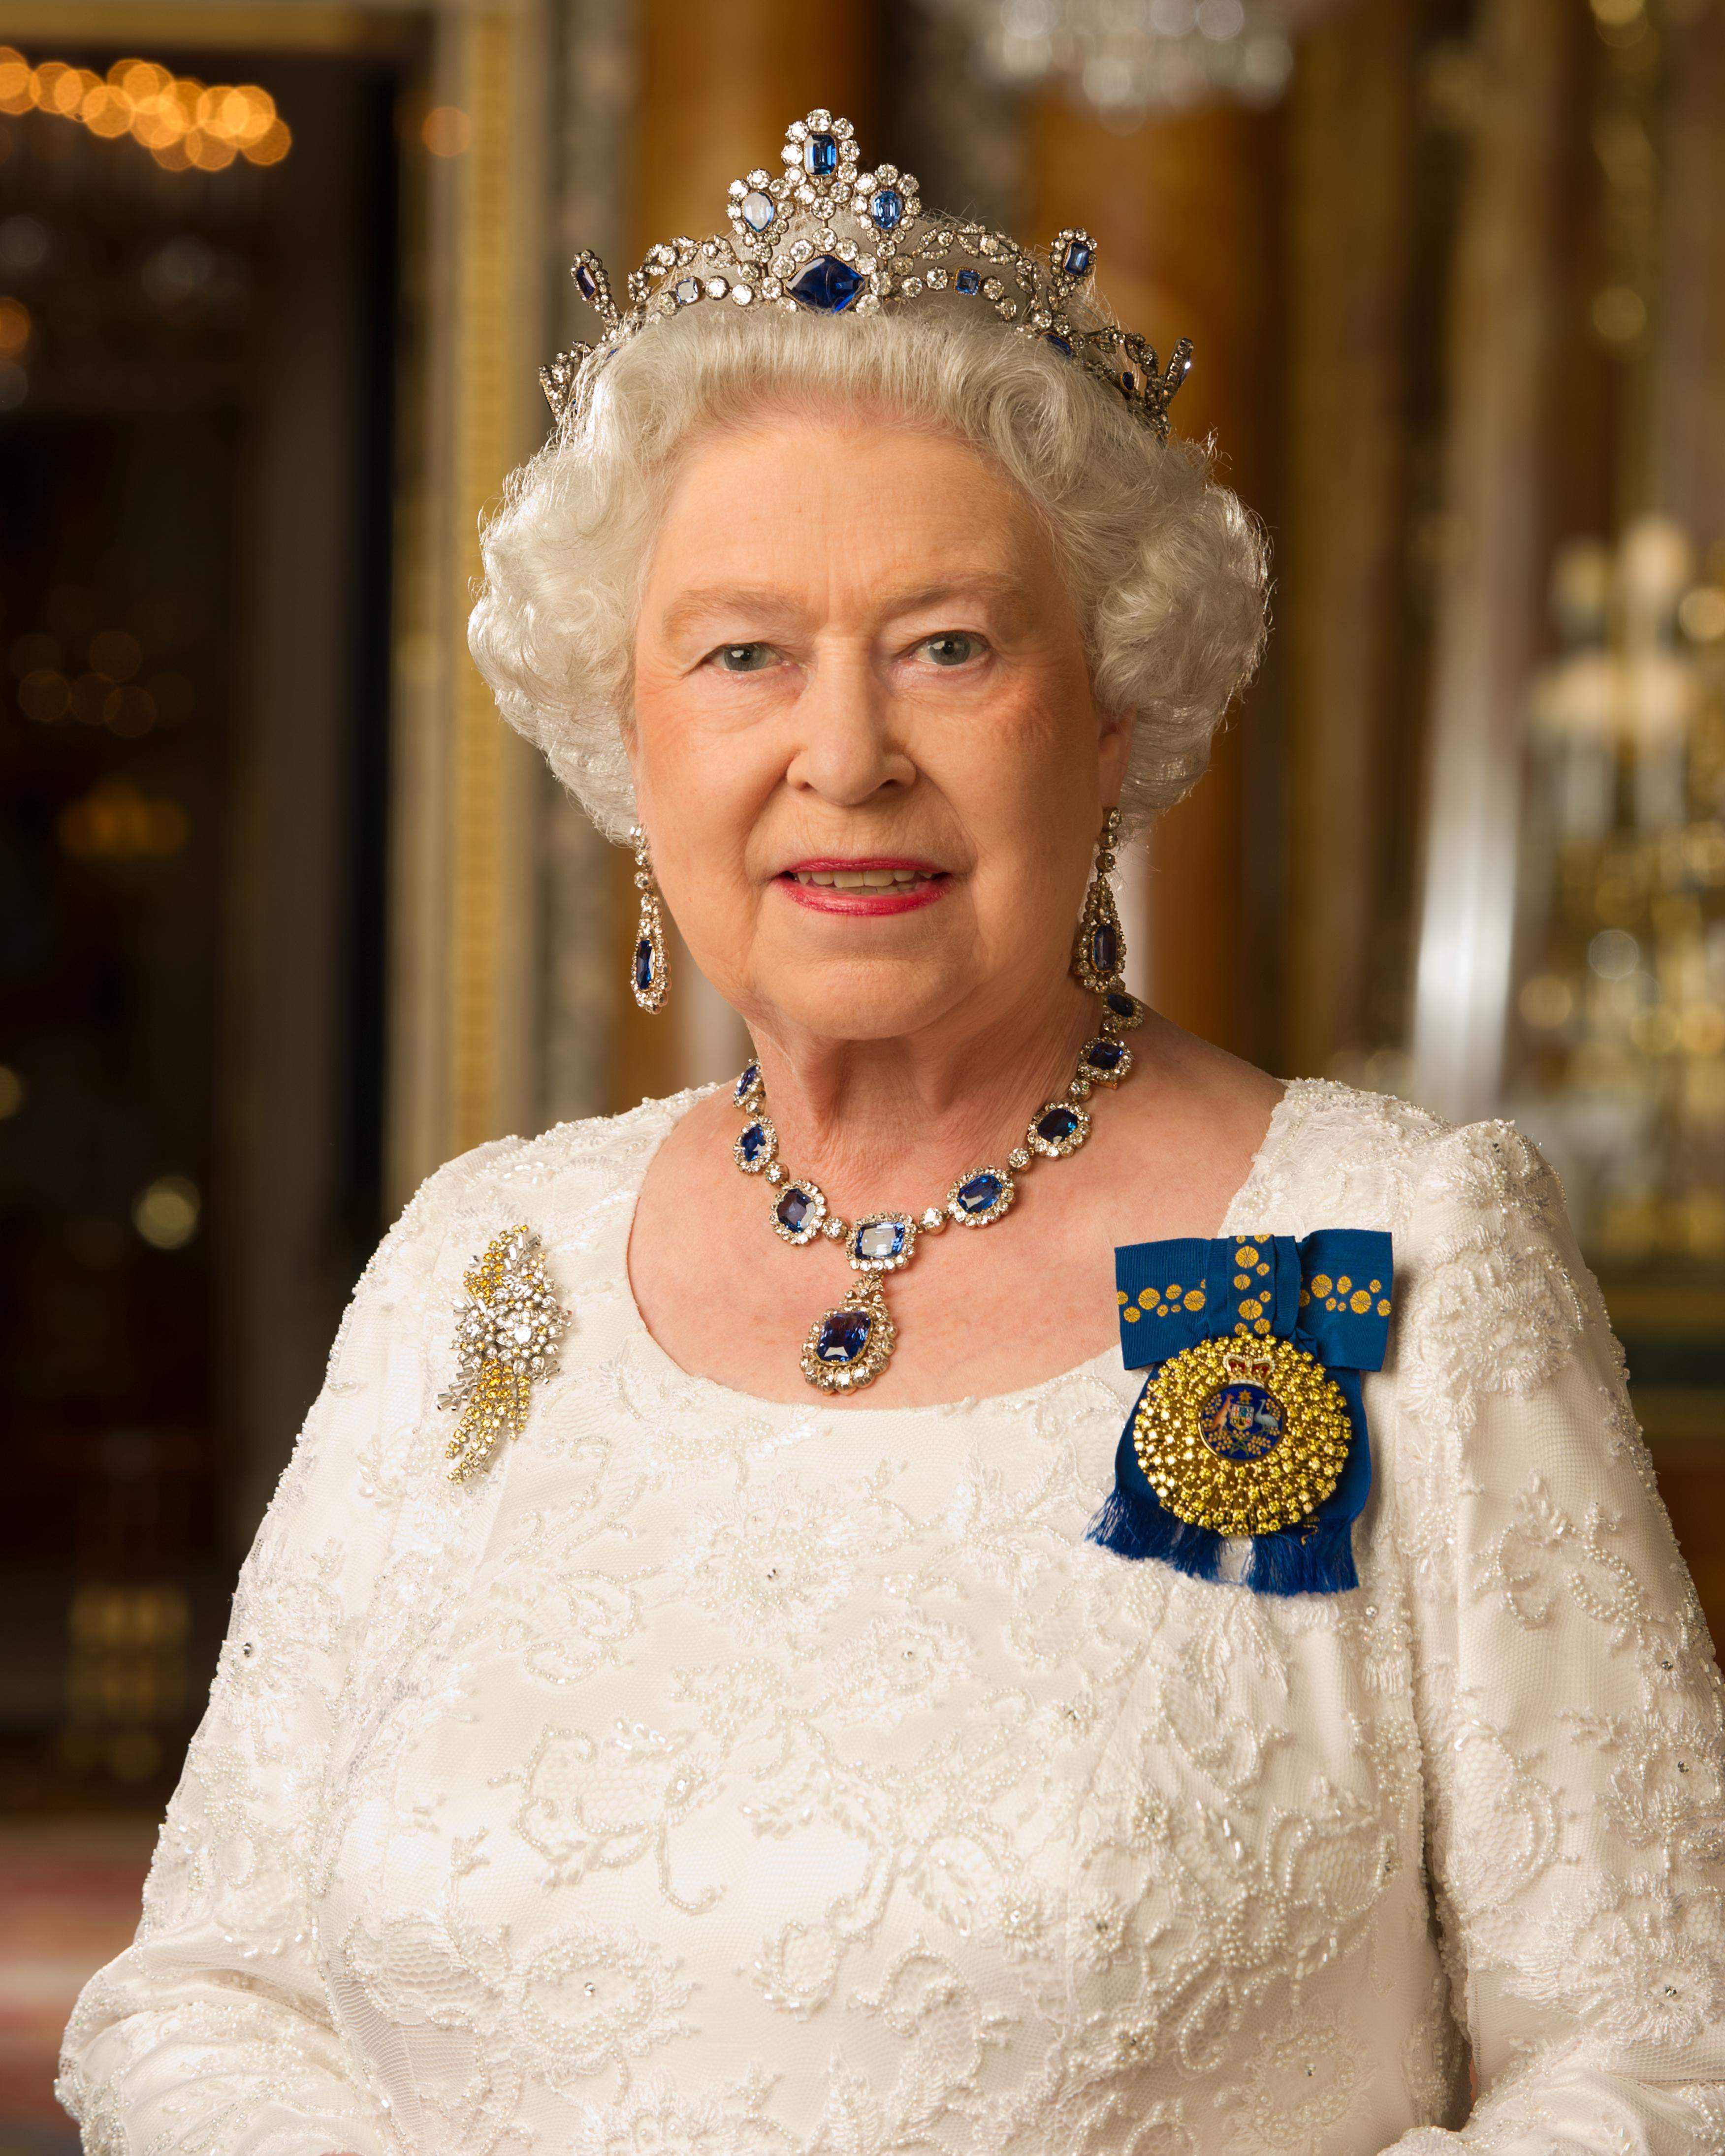 Her majesty the queen portrait